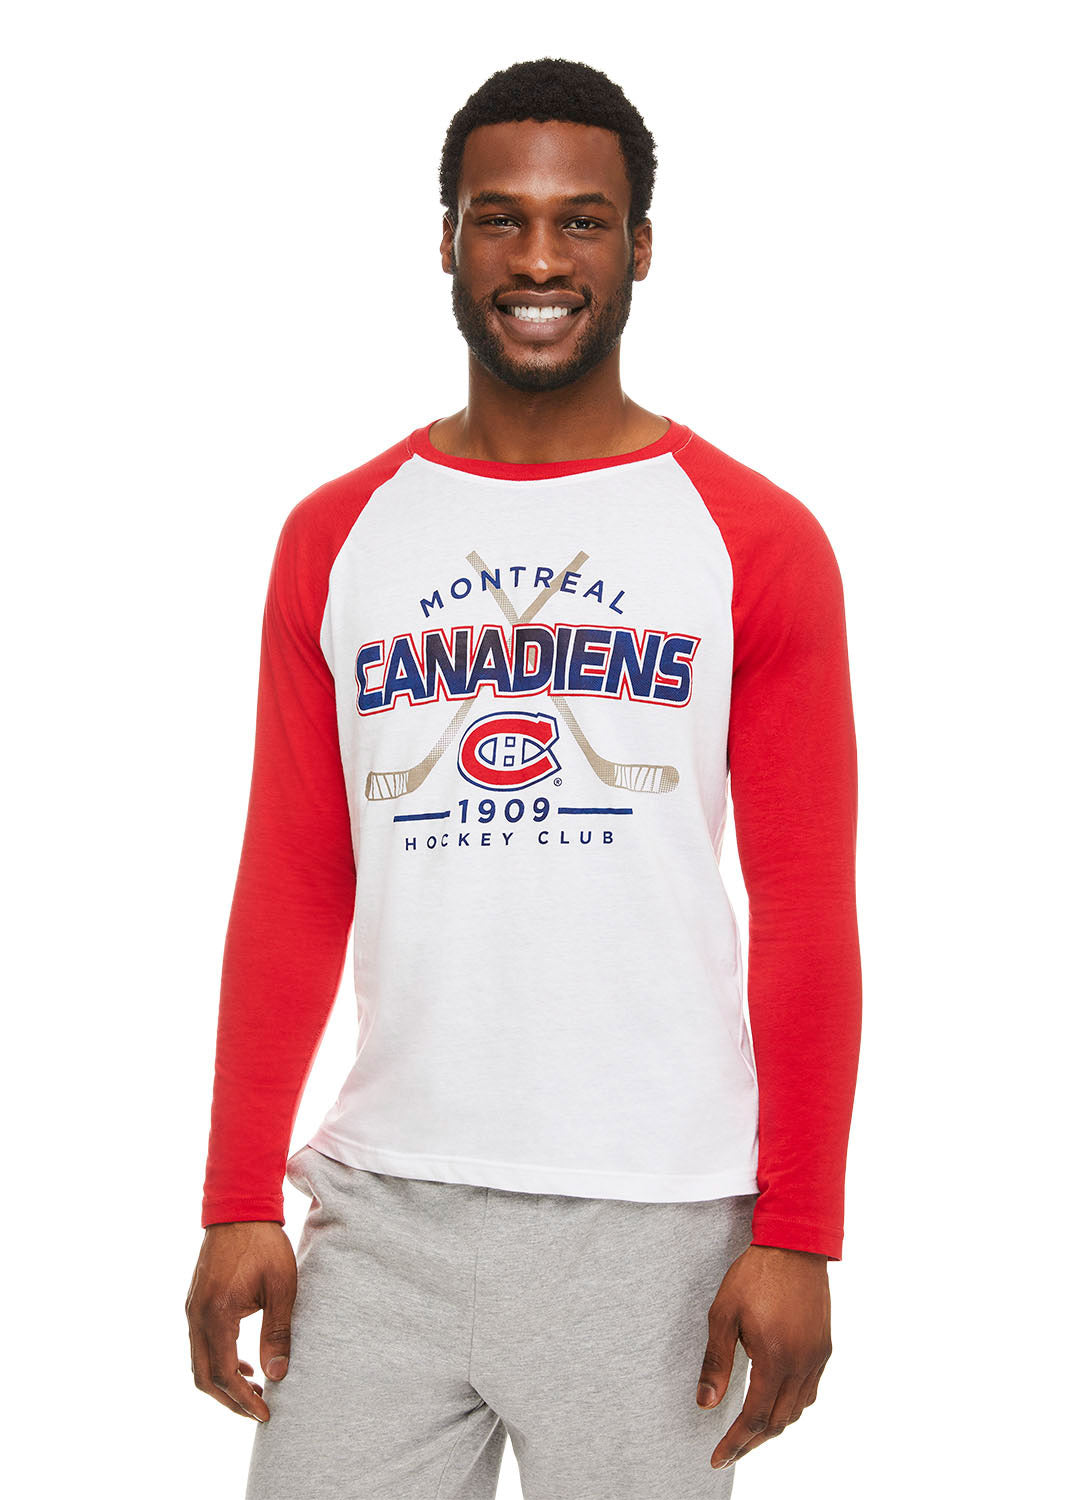 Men wearing Canadiens Sleep Shirt (white and red) with print